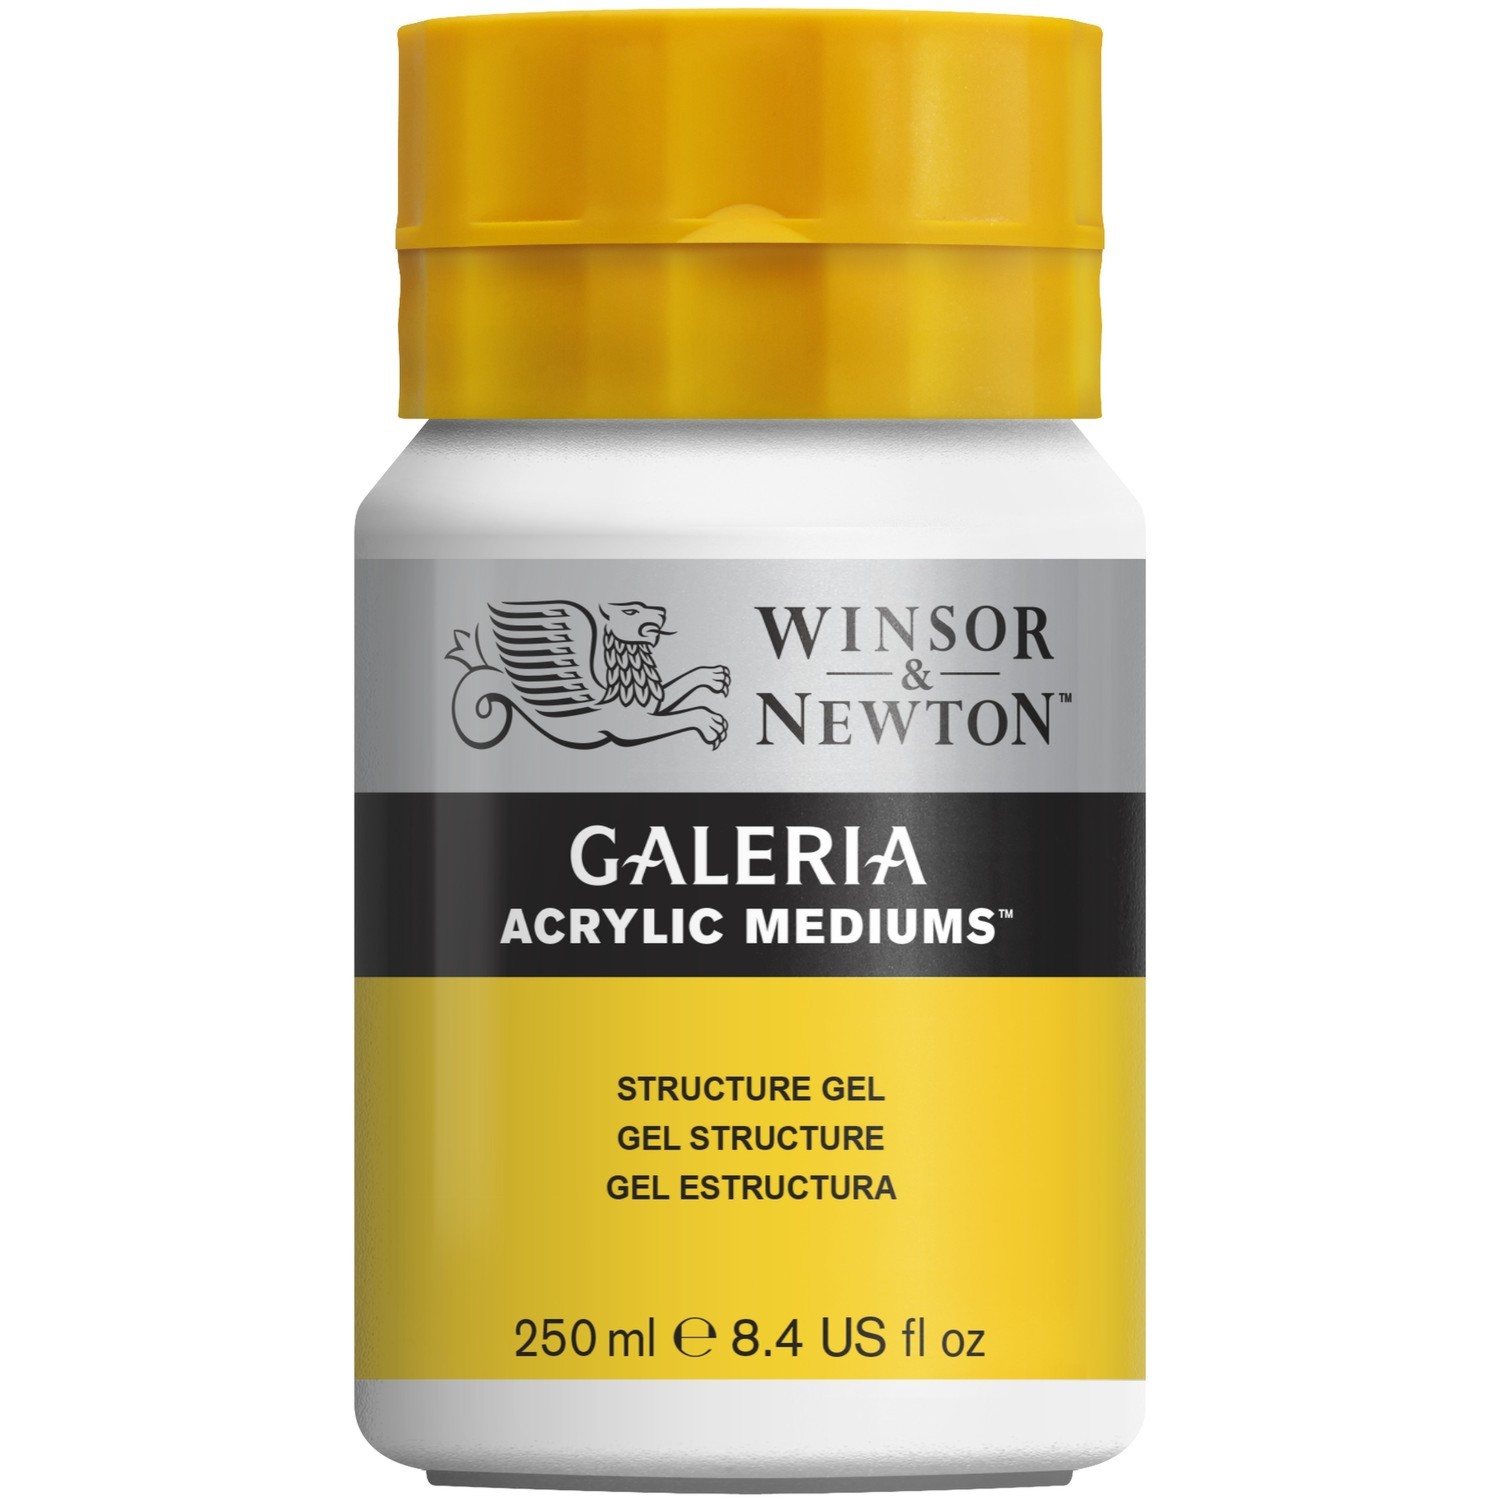 Winsor and Newton Galeria Structure Gel Image